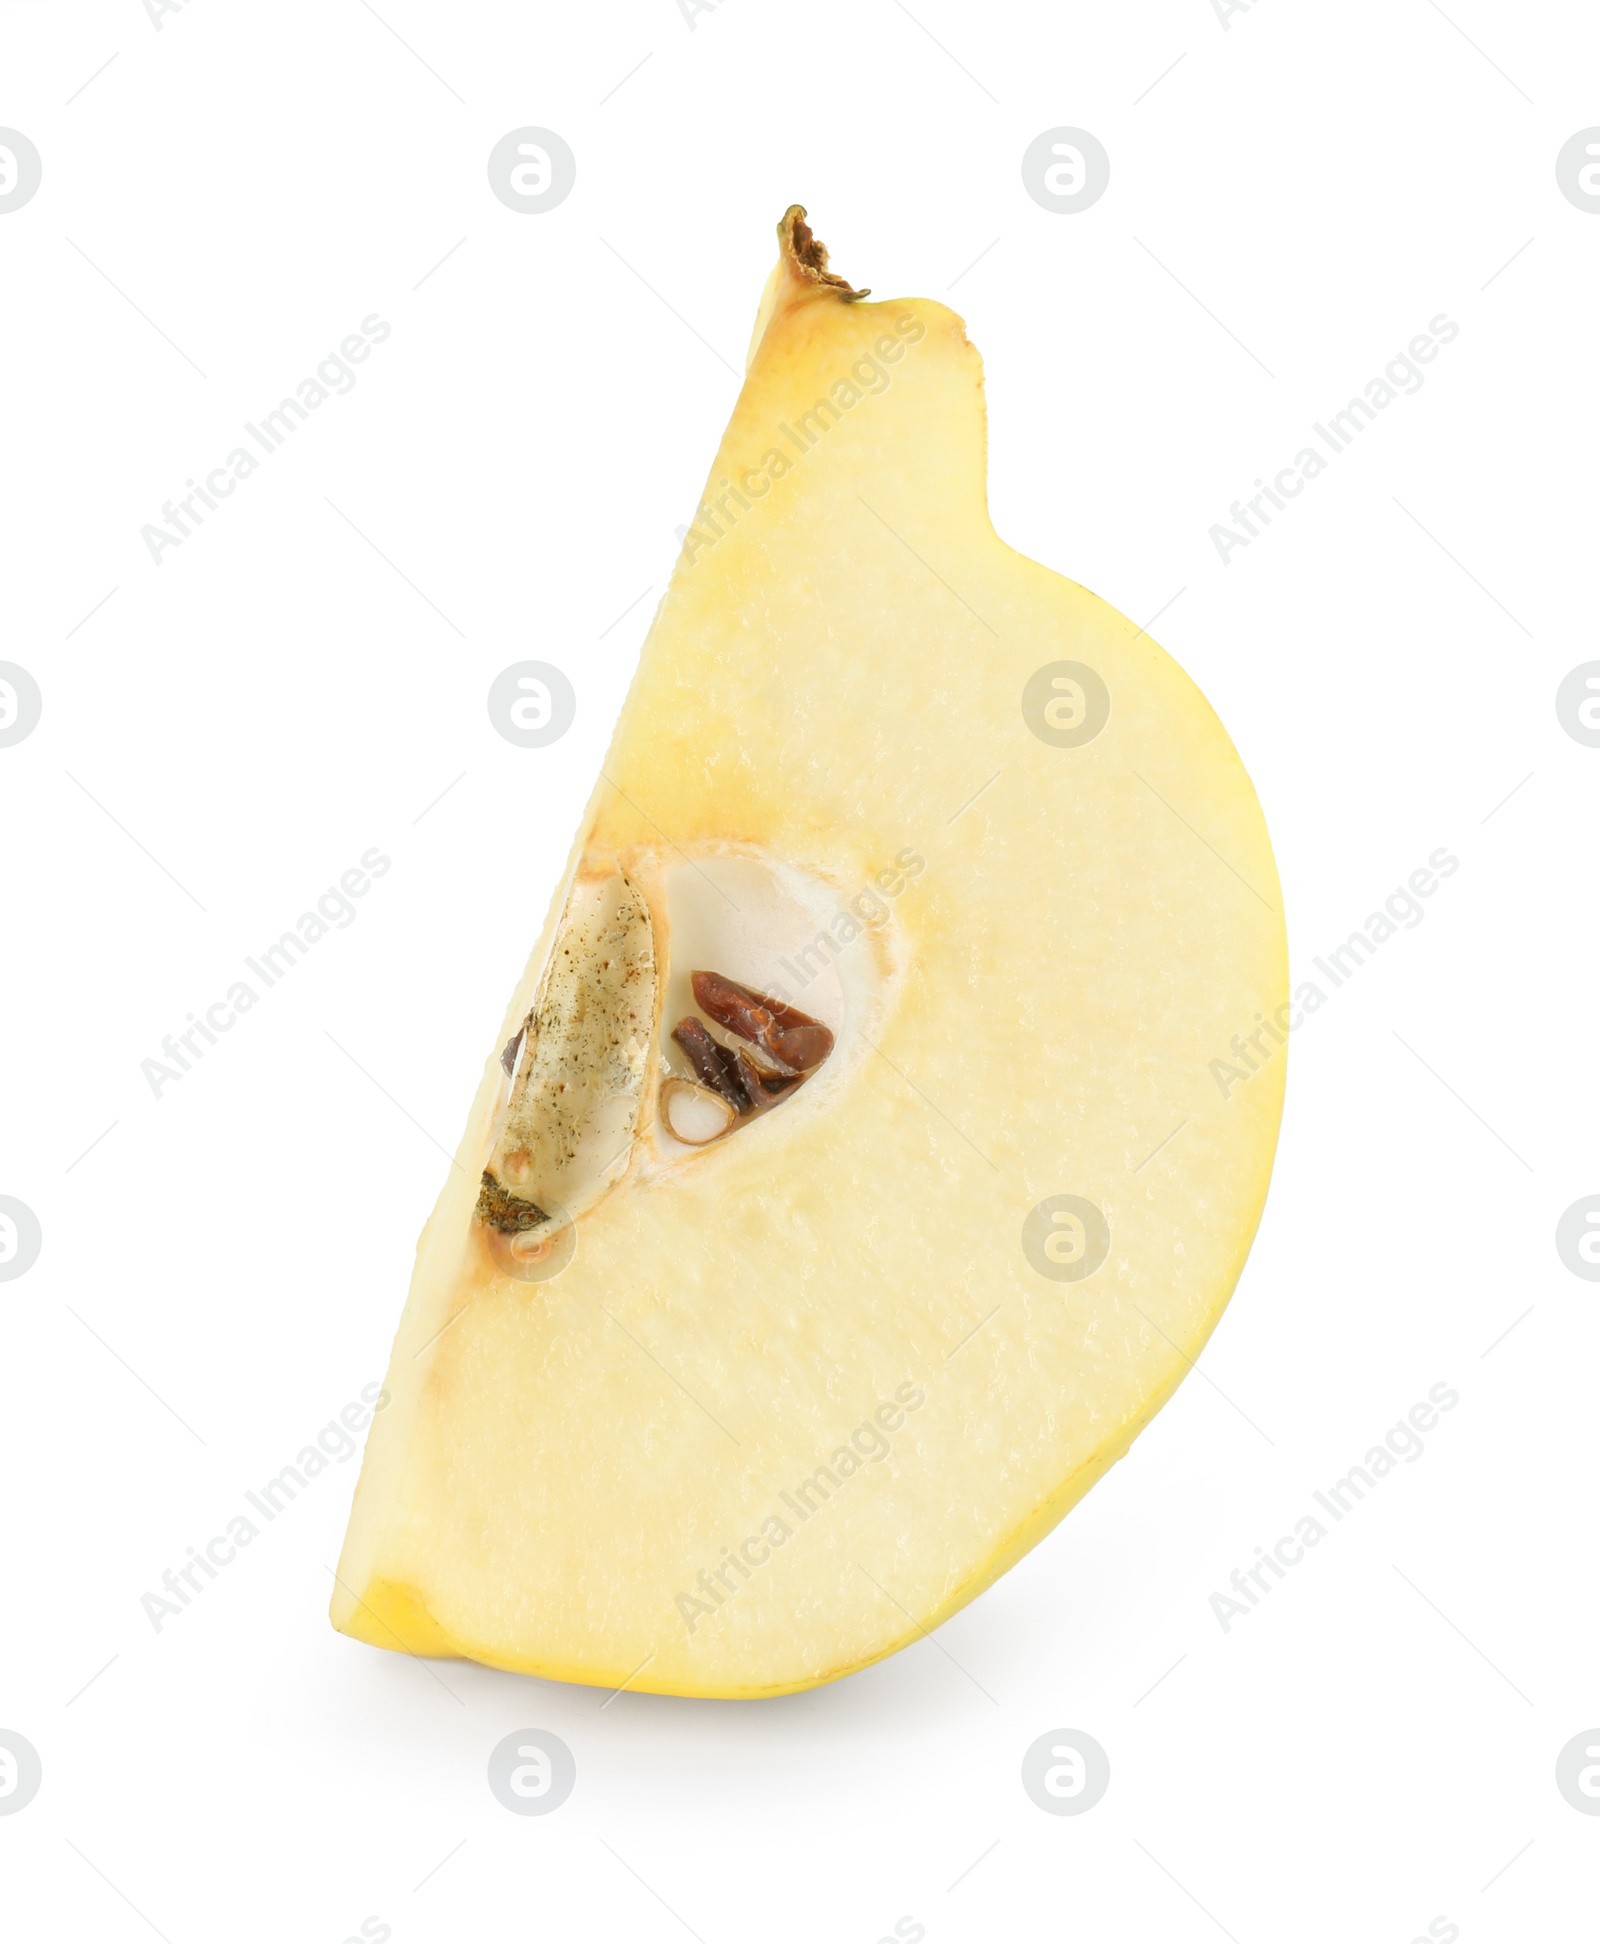 Photo of Piece of fresh ripe quince isolated on white